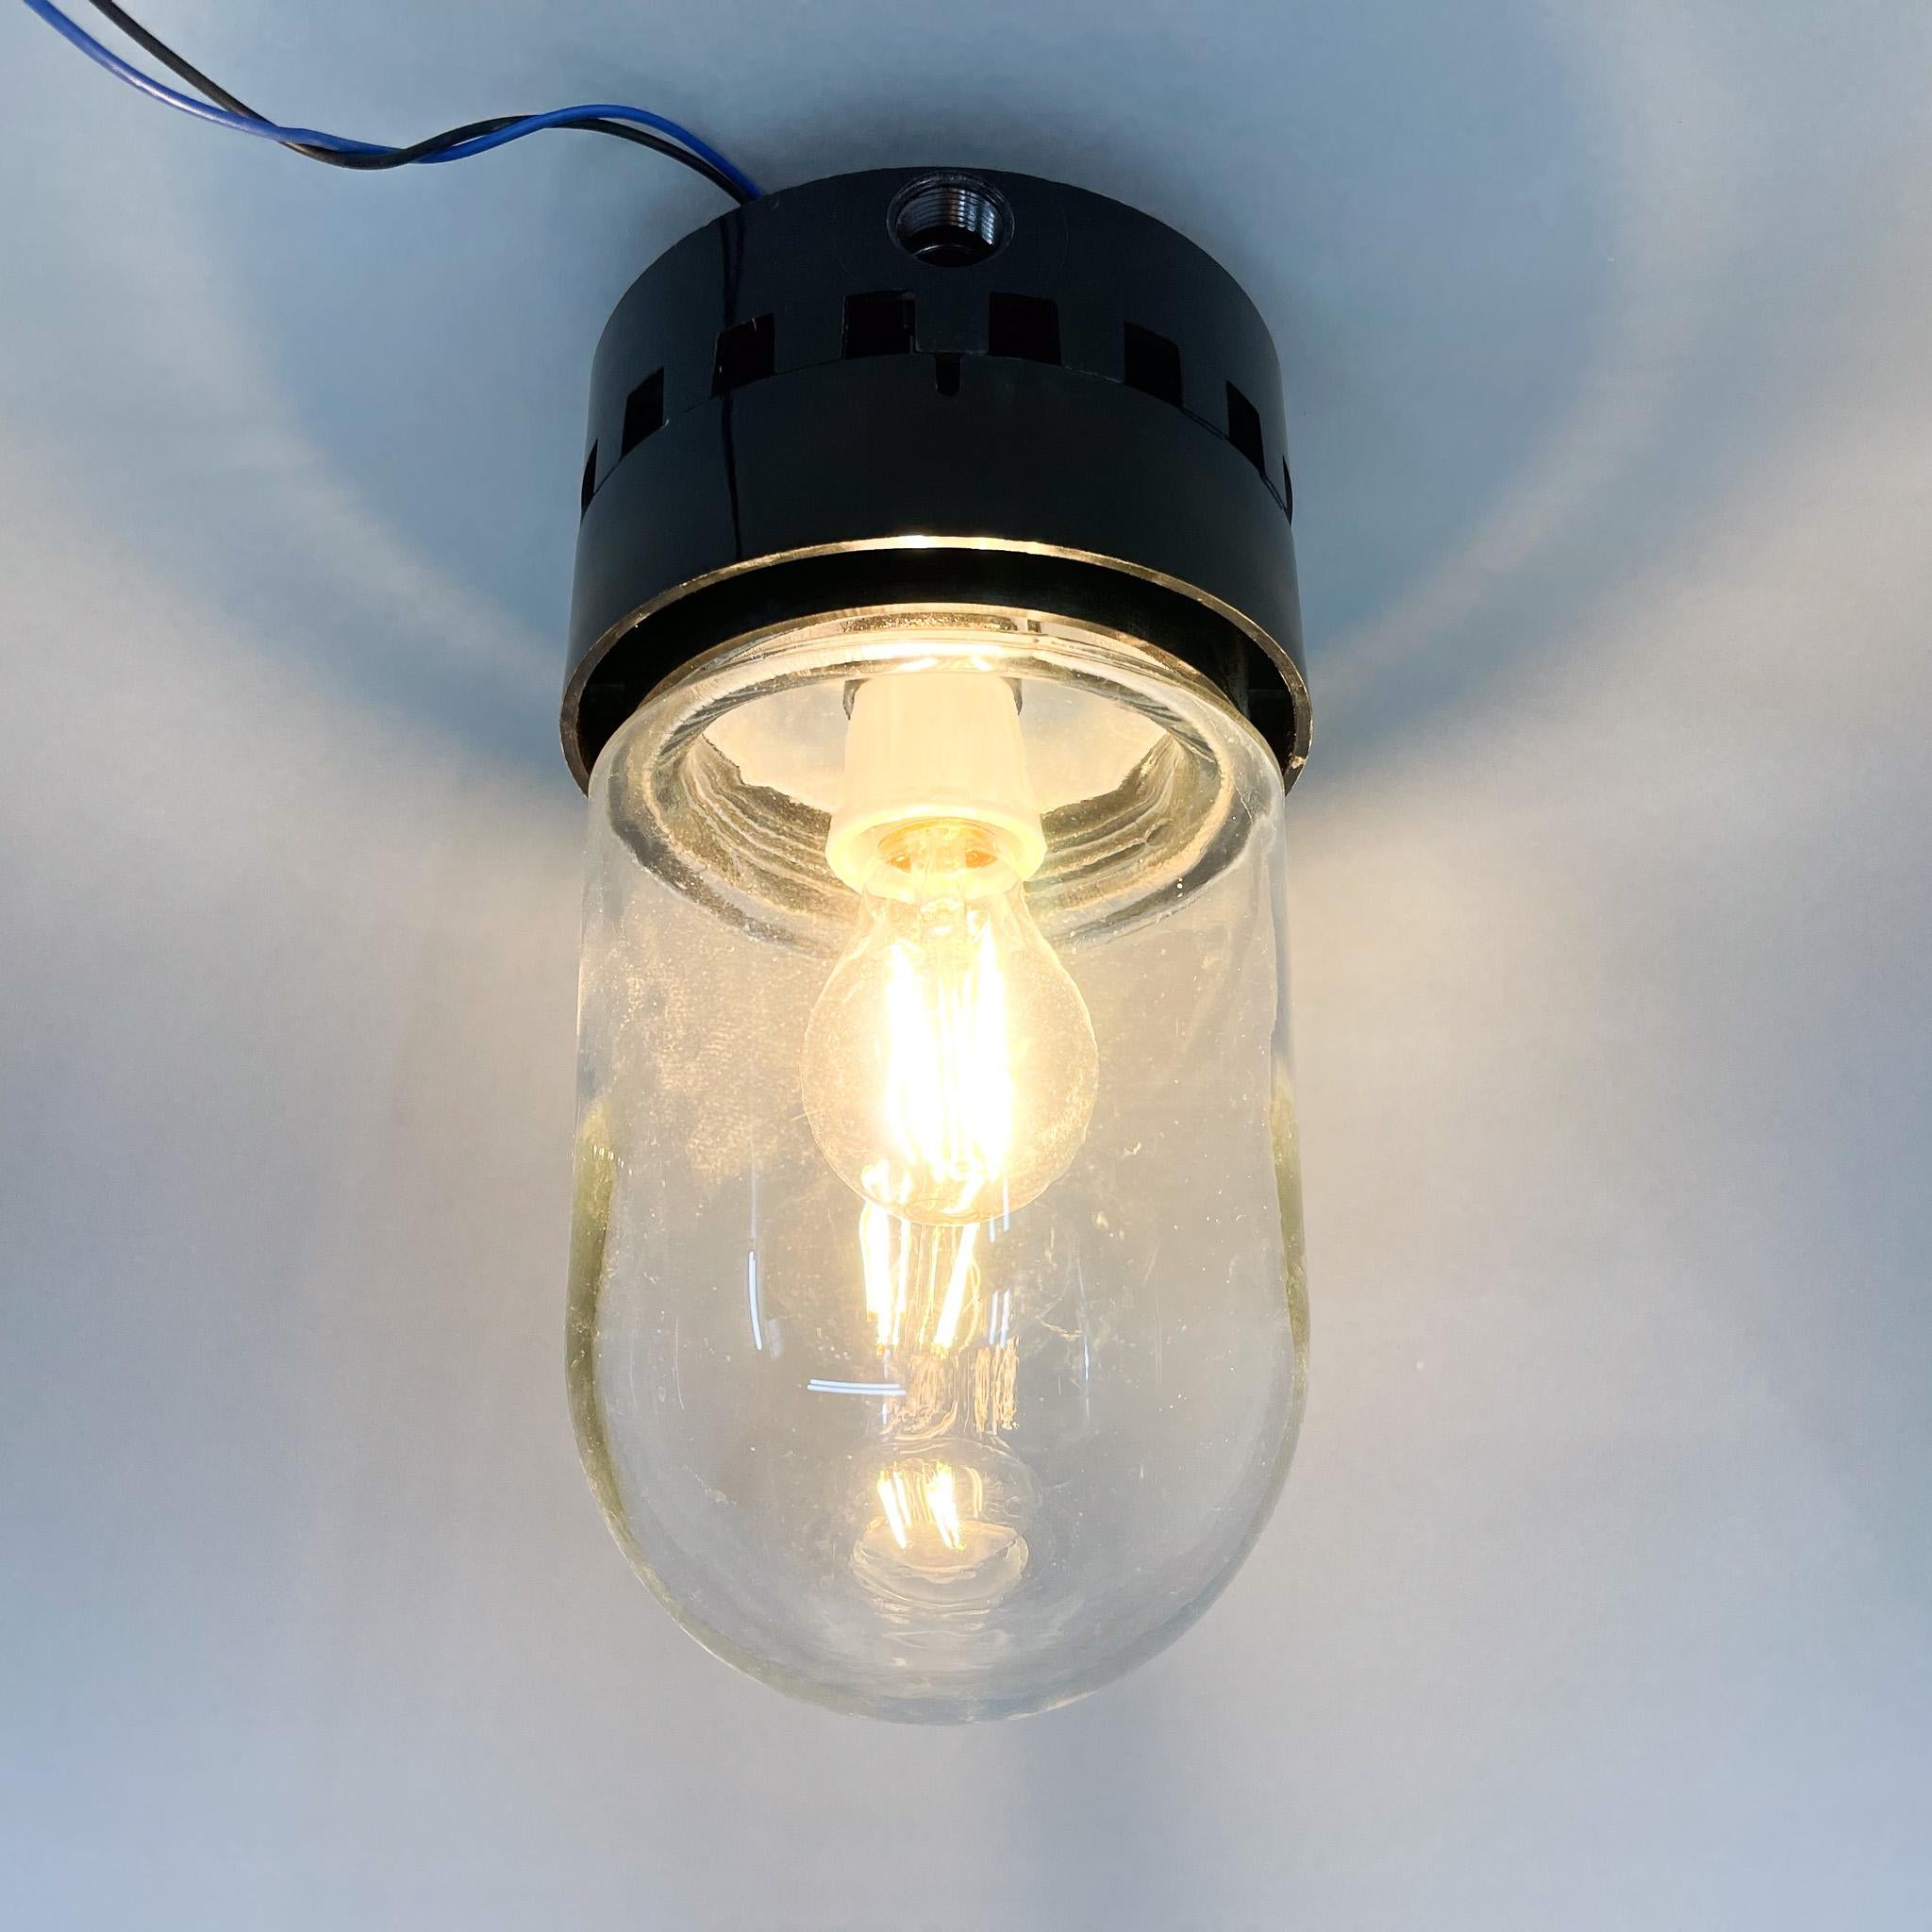 Industrial ceiling or wall light made of bakelite and clear glass. New wiring. Four items available upon request.